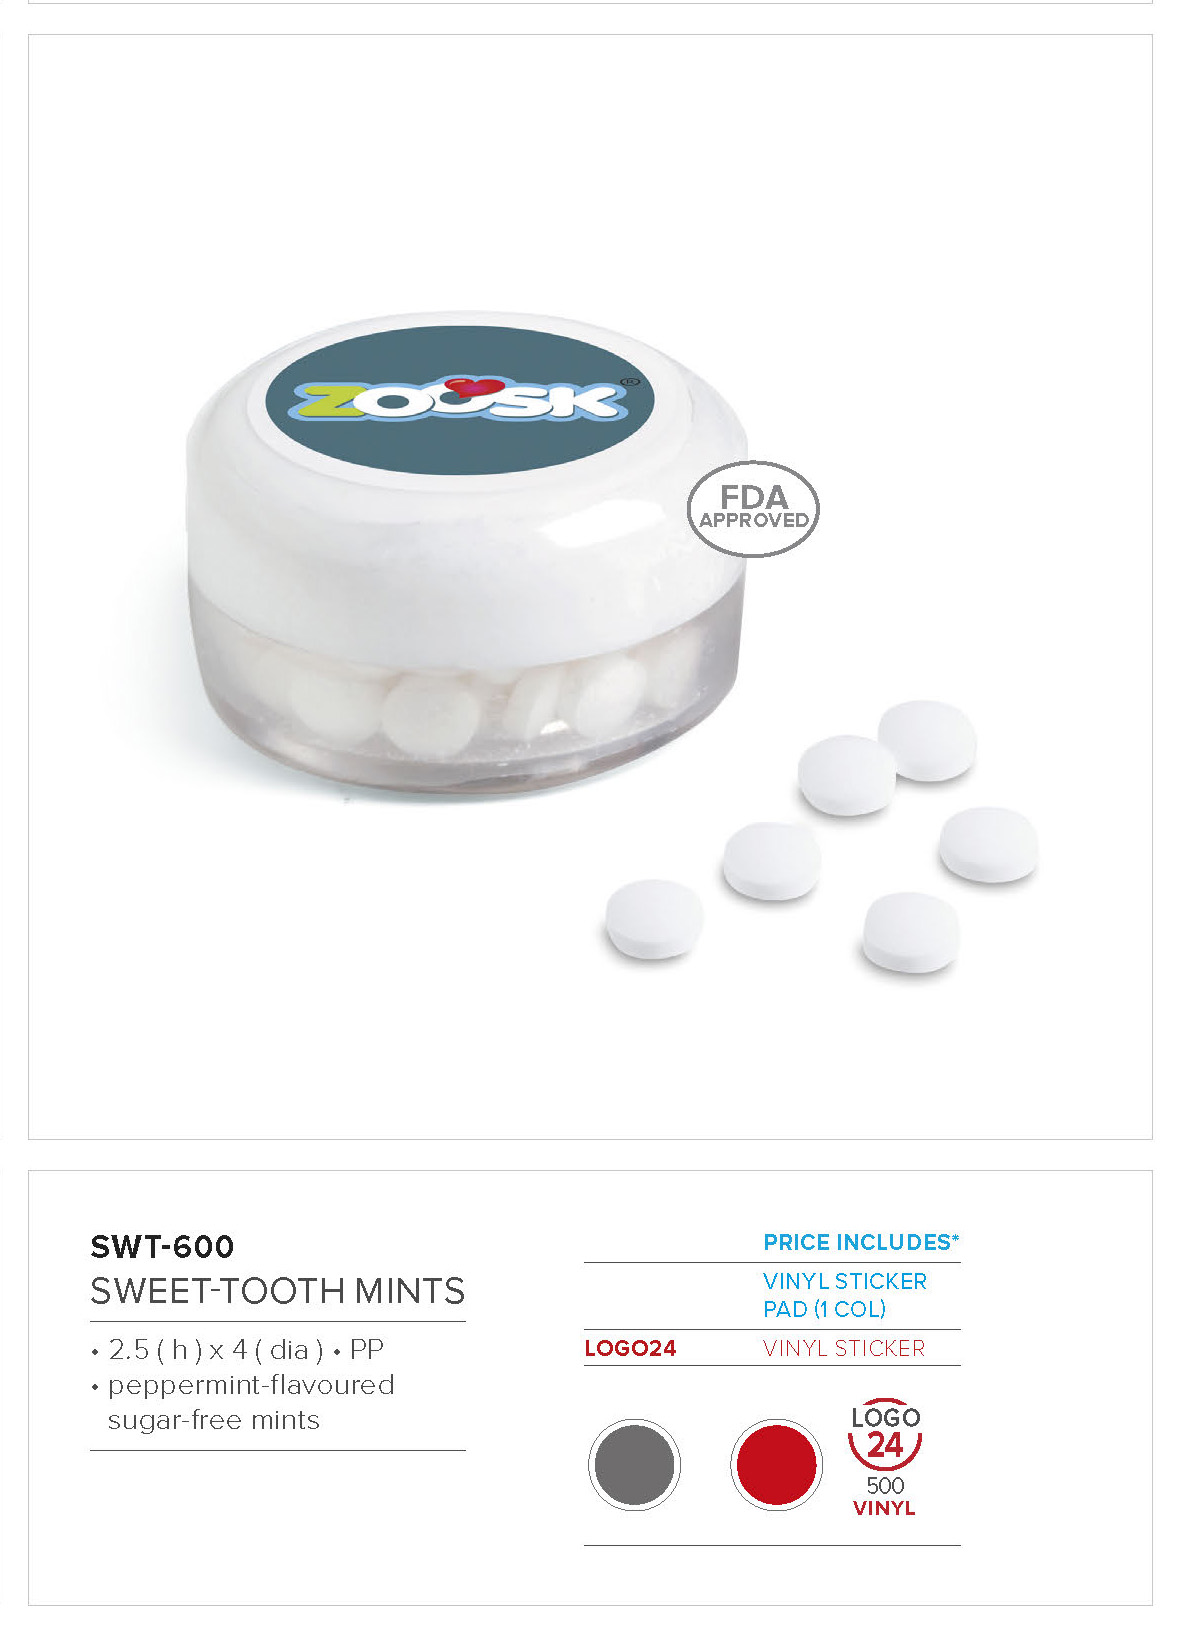 SWT-600 - Sweet-Tooth Mints - Catalogue Image